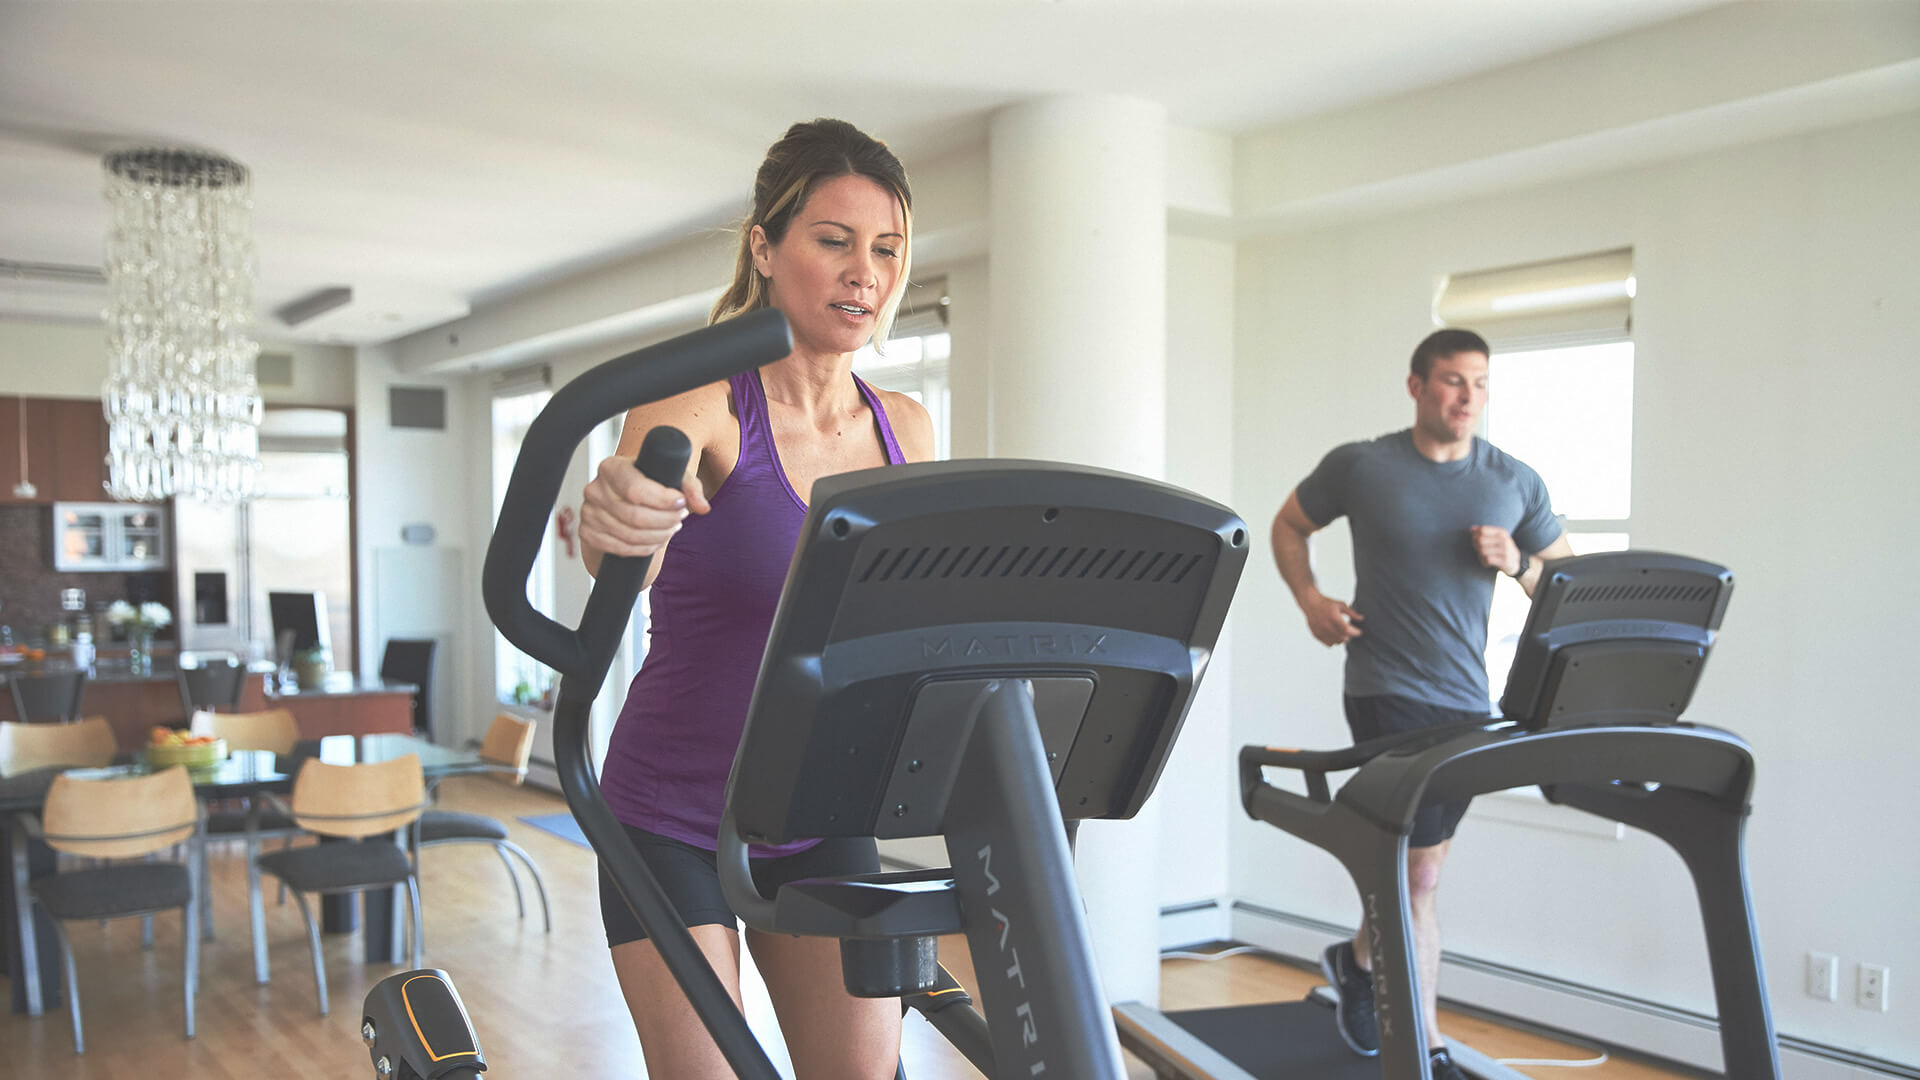 Man and woman working out on Matrix cardio equipment in home